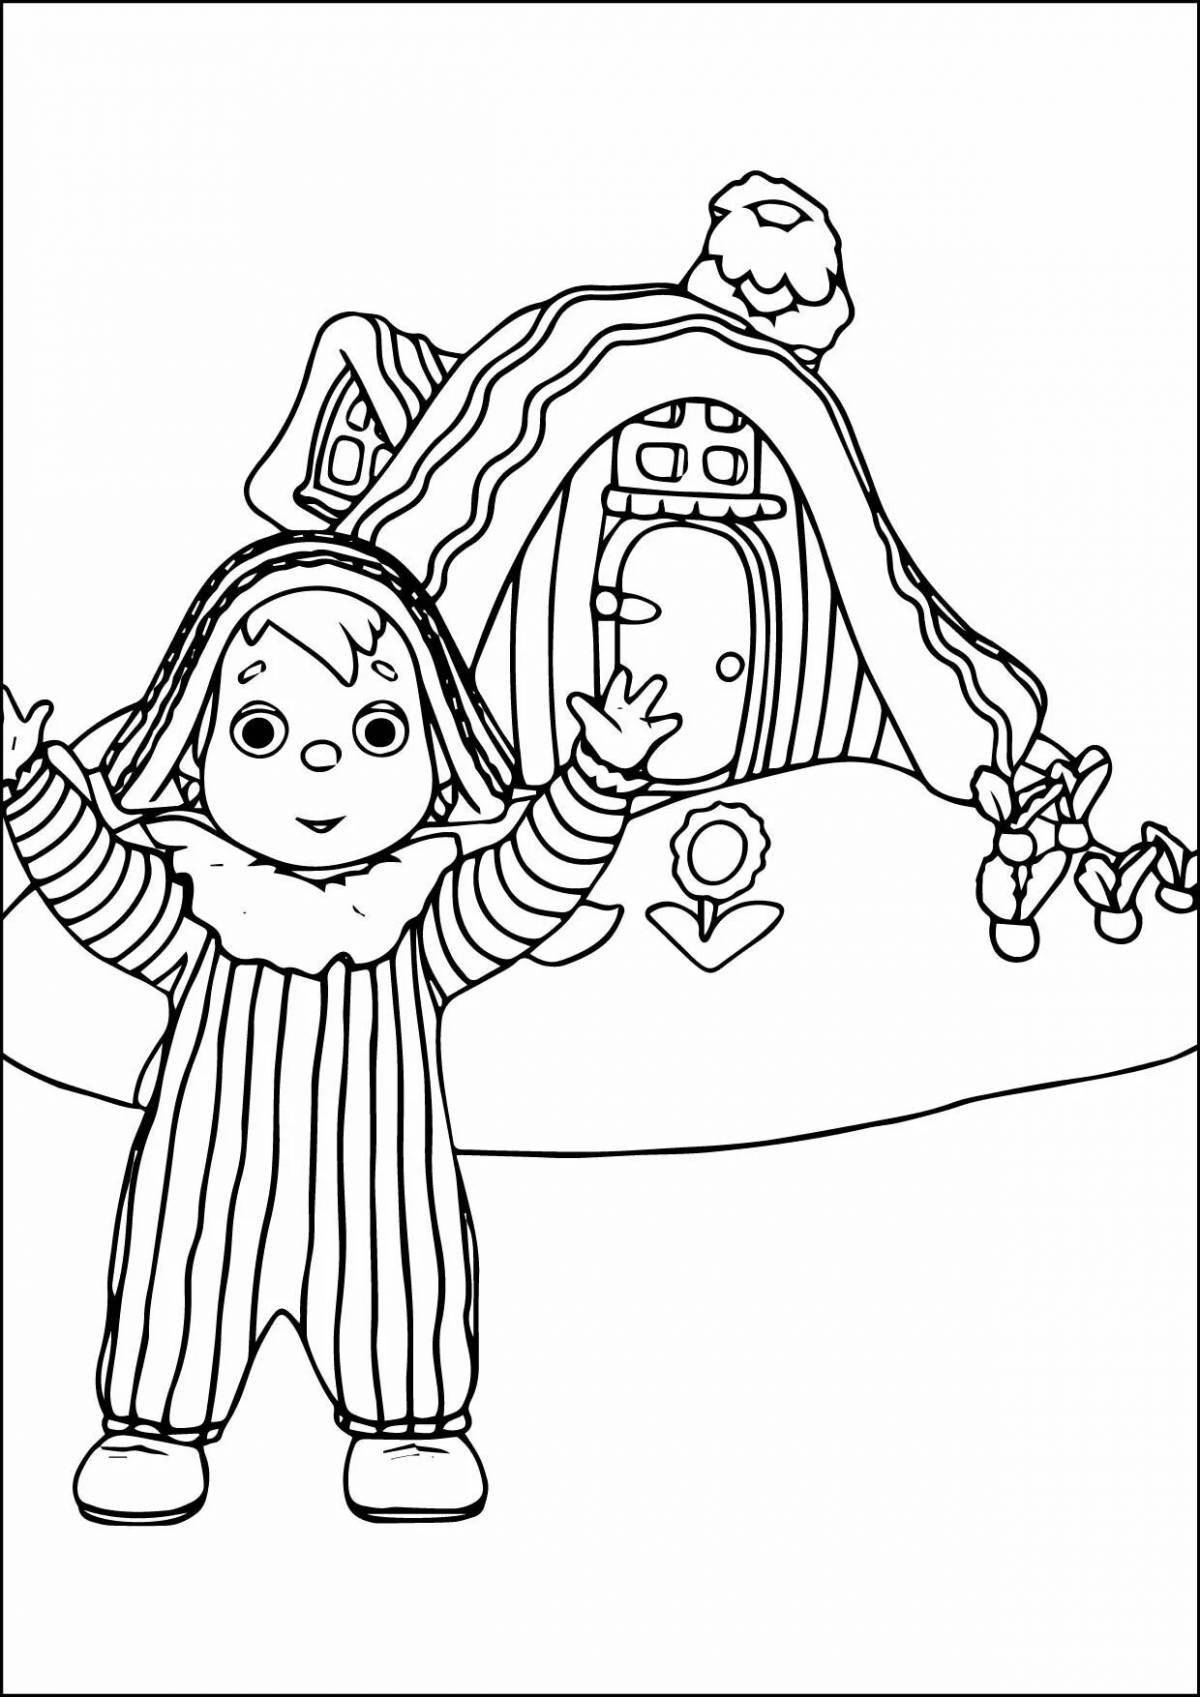 Andy's colorful coloring page